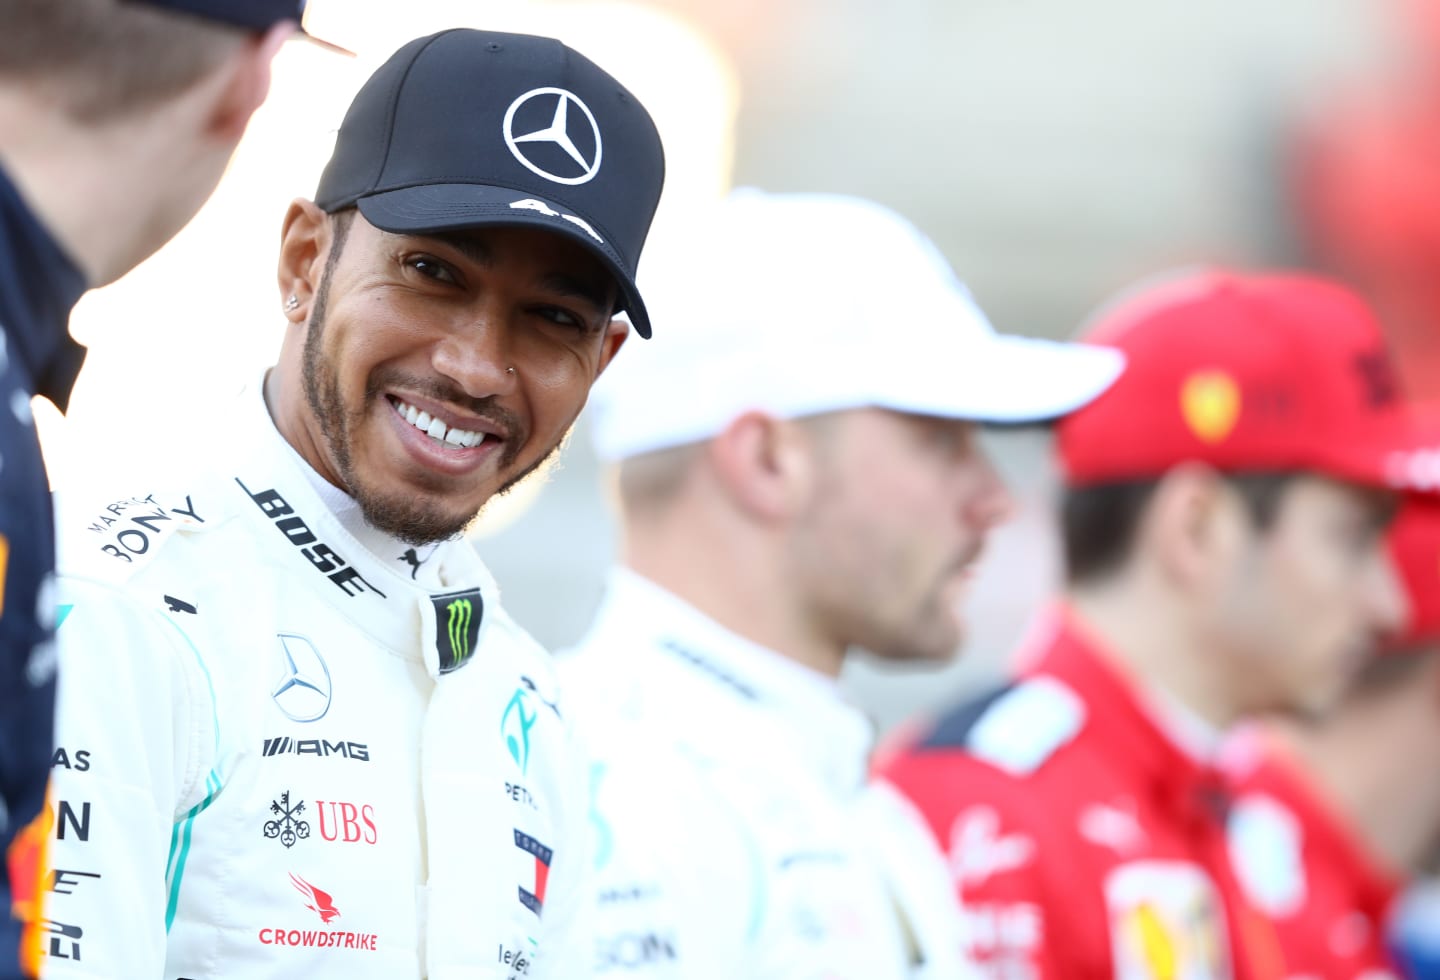 BARCELONA, SPAIN - FEBRUARY 19: Lewis Hamilton of Great Britain and Mercedes GP is seen as the